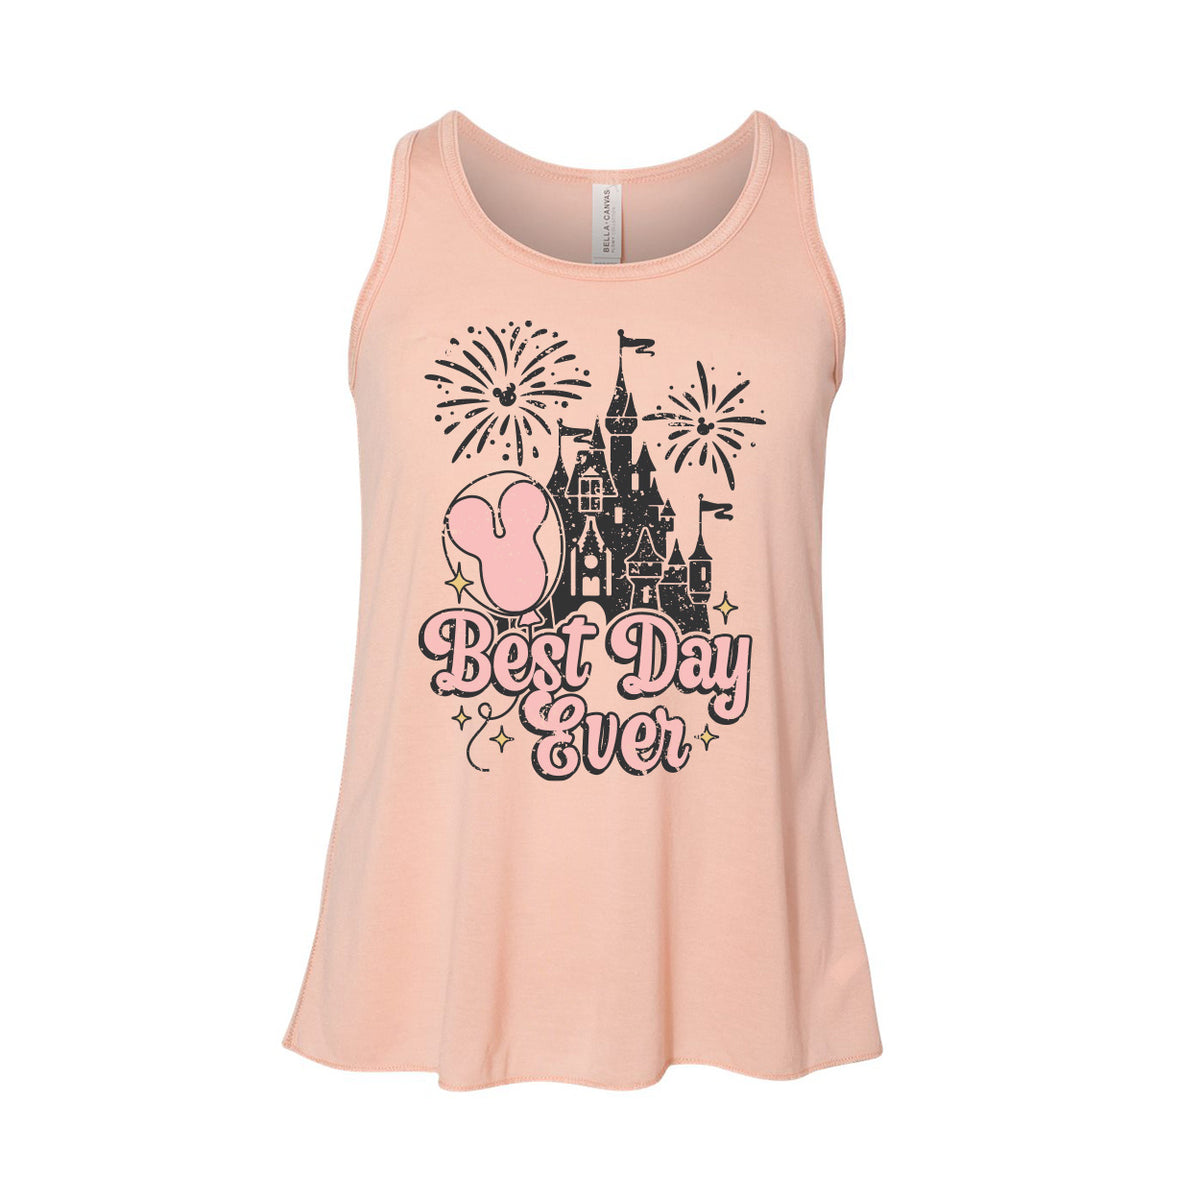 Best Day Ever Flowy Tank Top, Youth Size